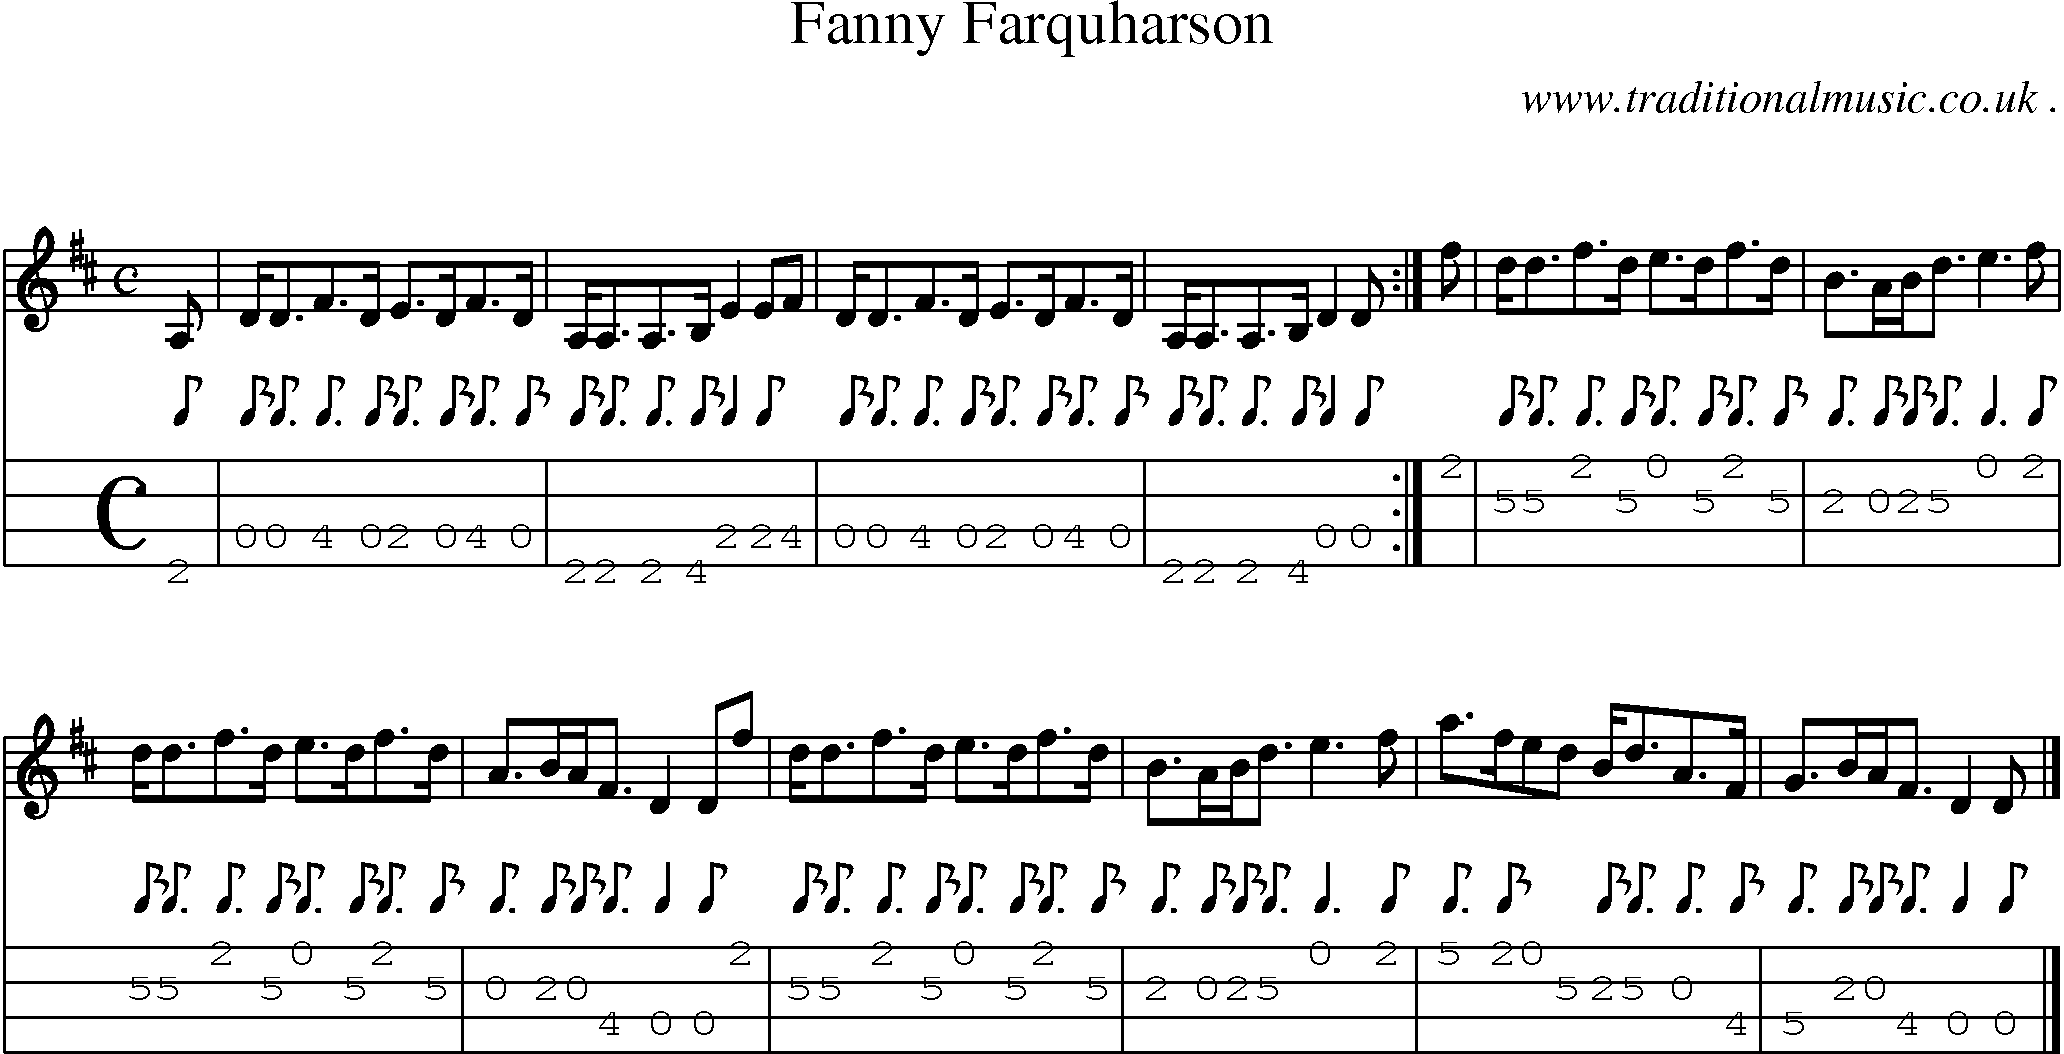 Sheet-music  score, Chords and Mandolin Tabs for Fanny Farquharson